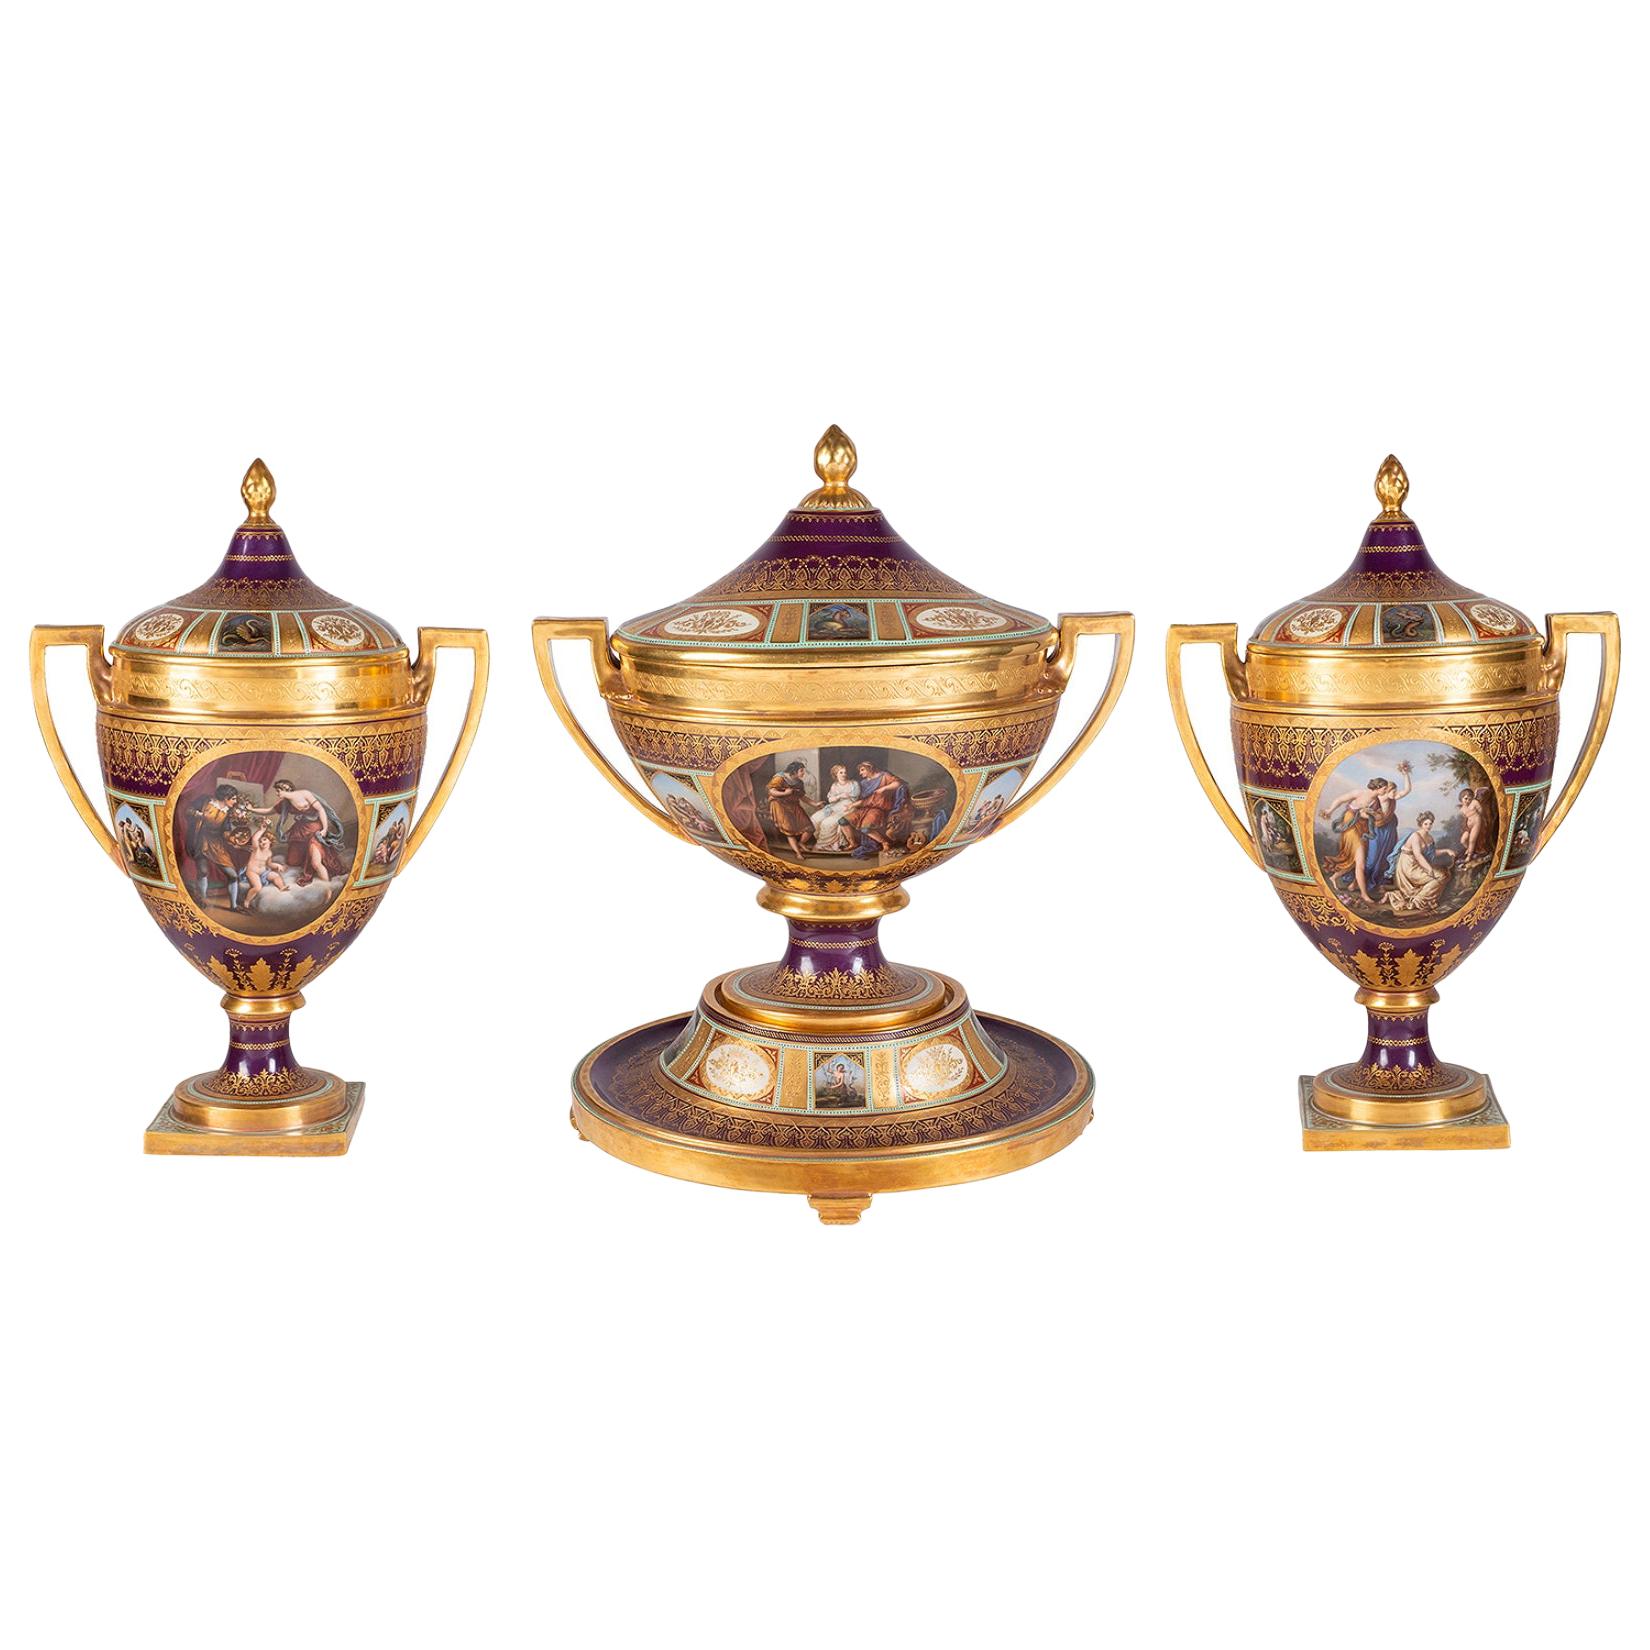 Rare 19th Century Vienna Style Porcelain Garniture of Three Large Lidded Vases For Sale